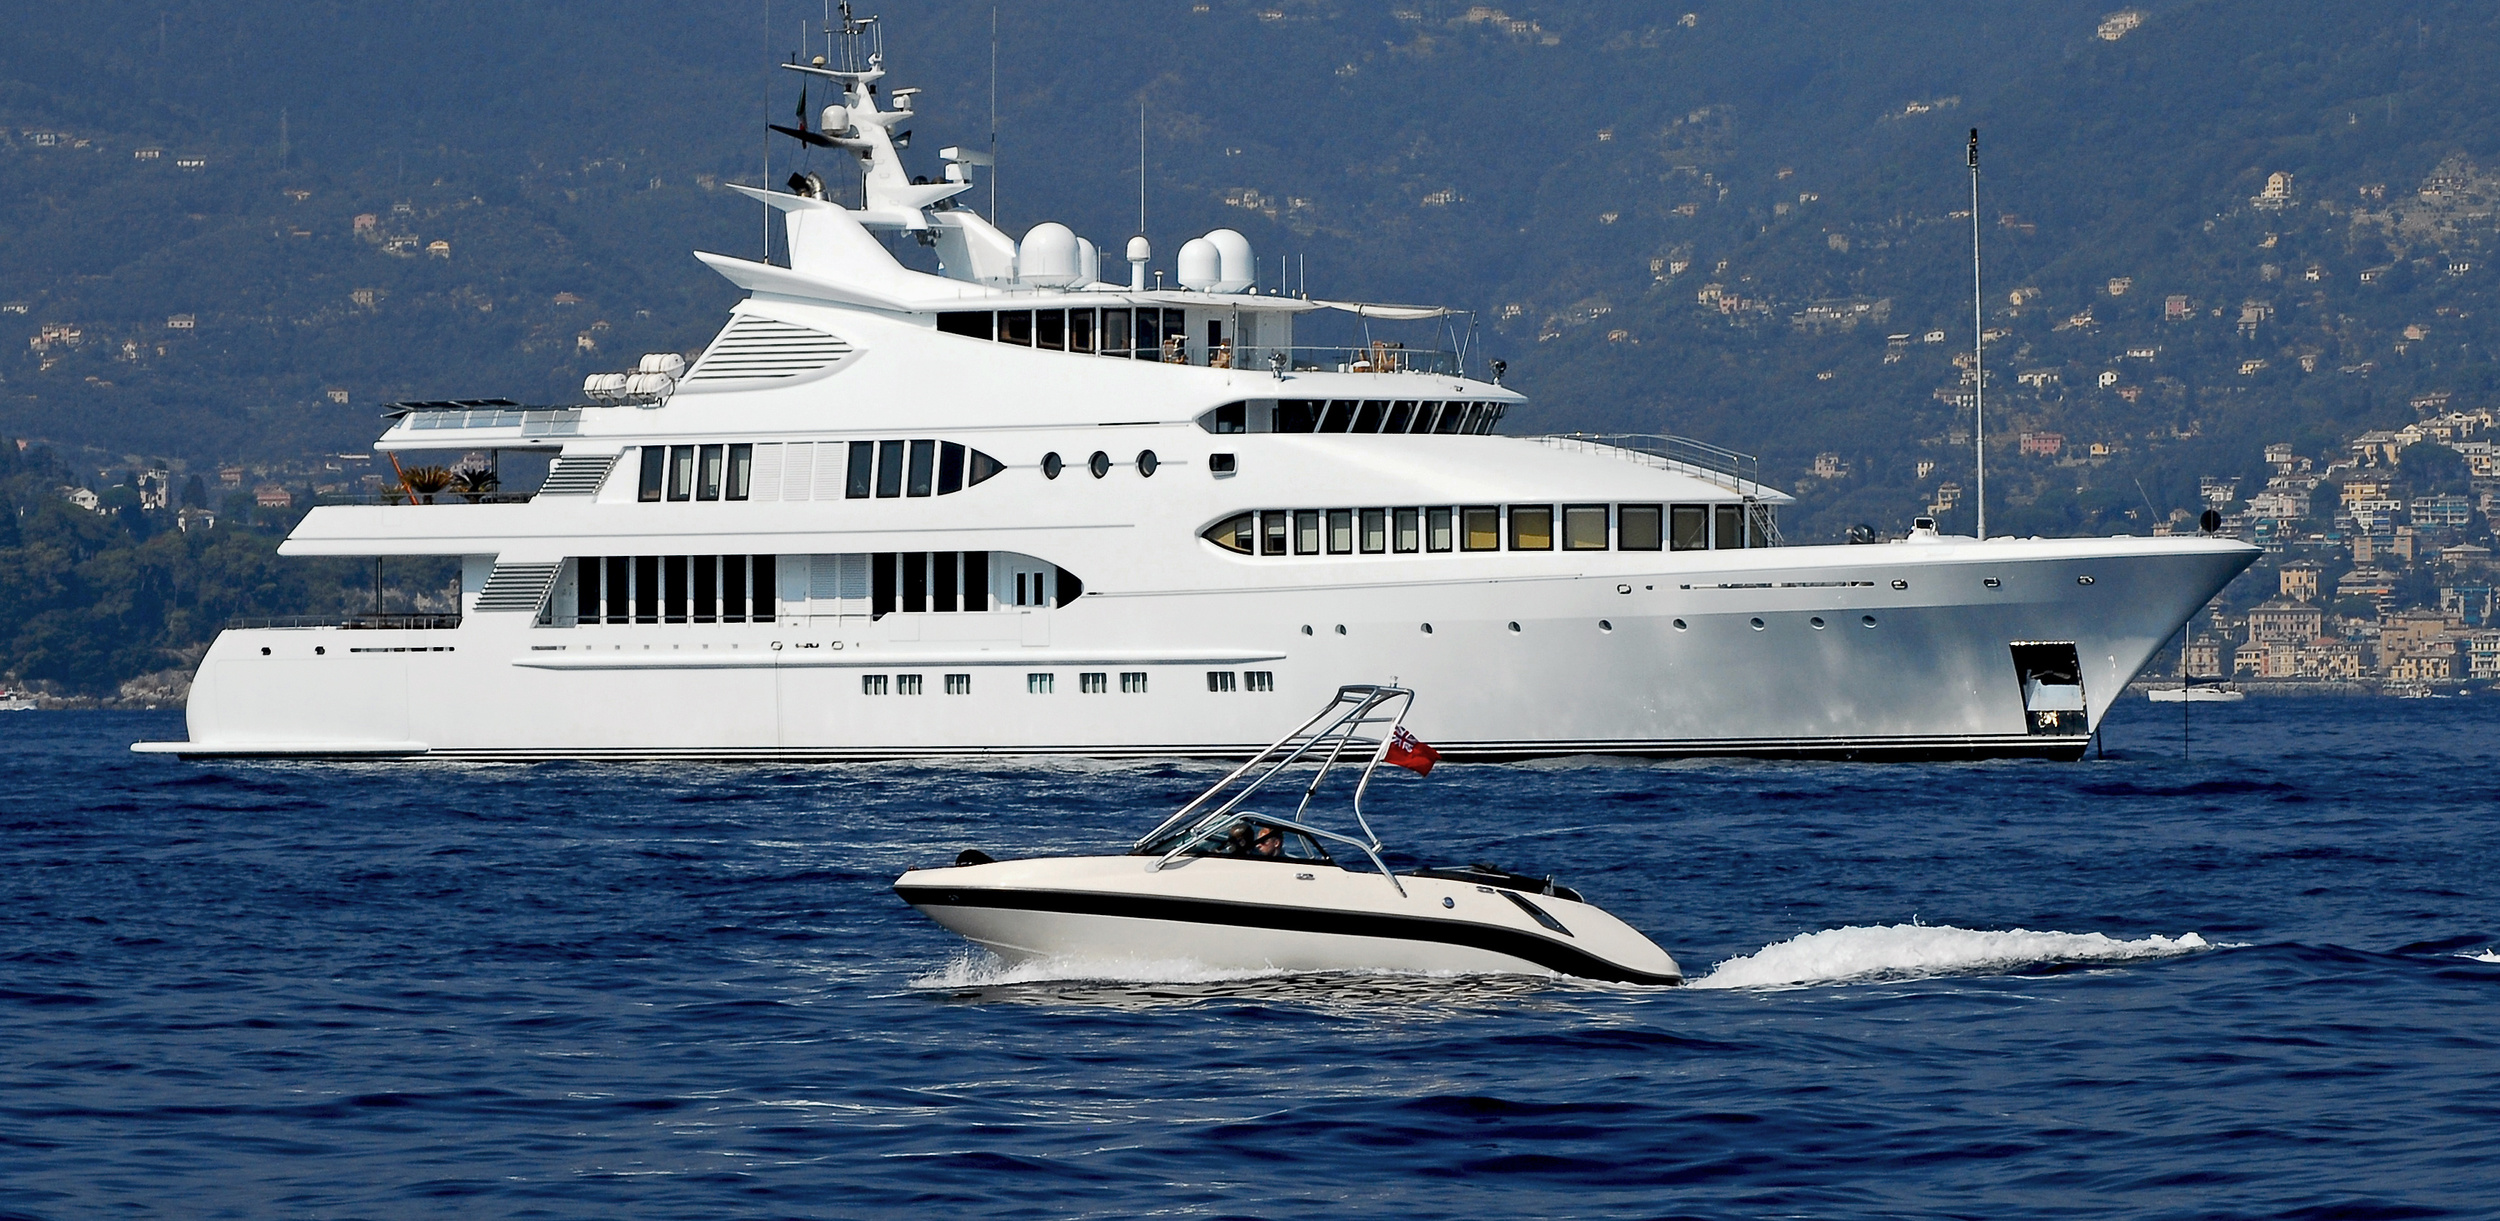   International Yacht Charters    Inquire Today  